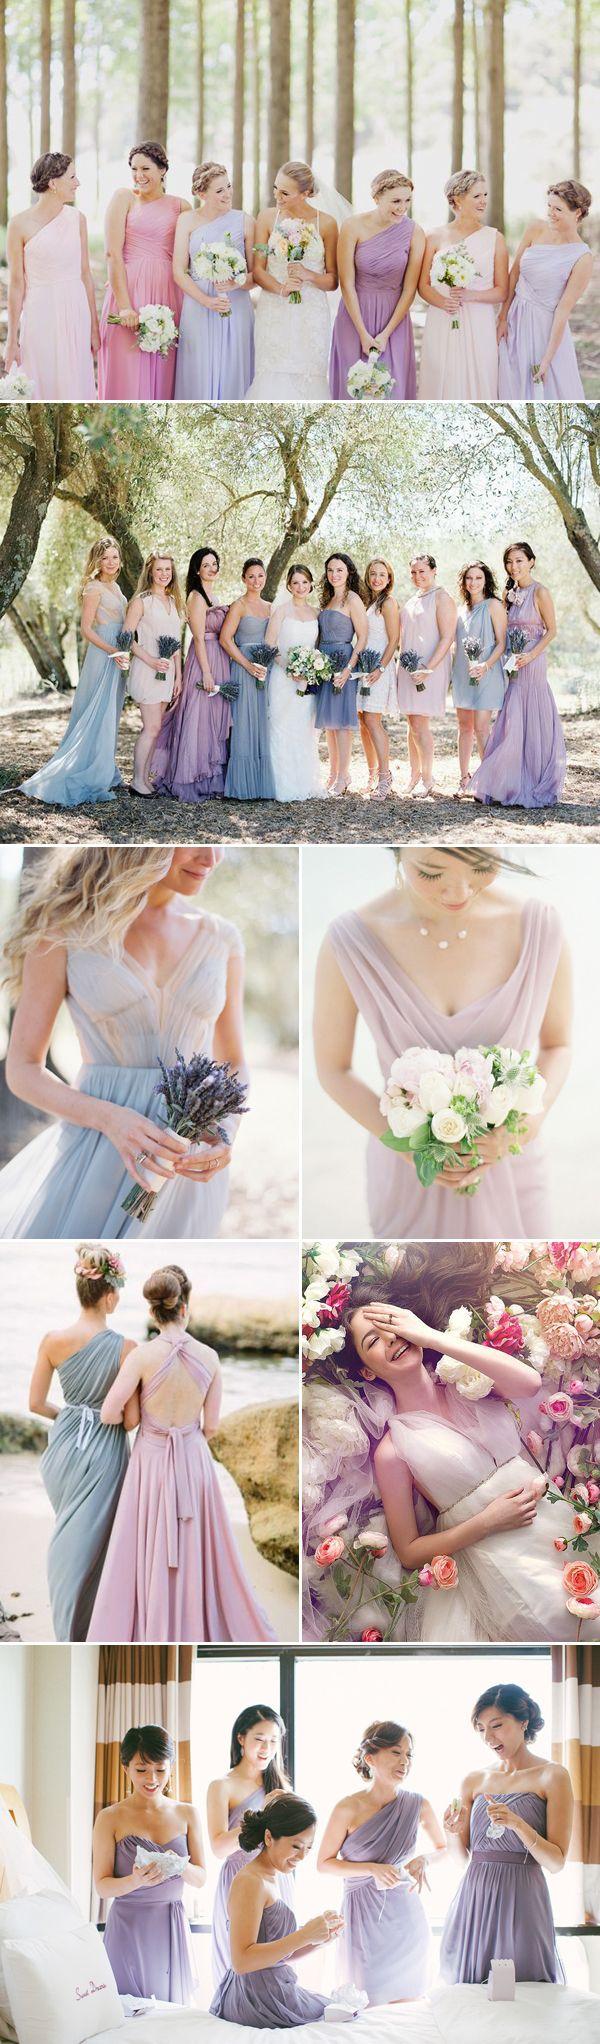 Mariage - Top 8 Bridesmaid Dress Trends For Summer 2014